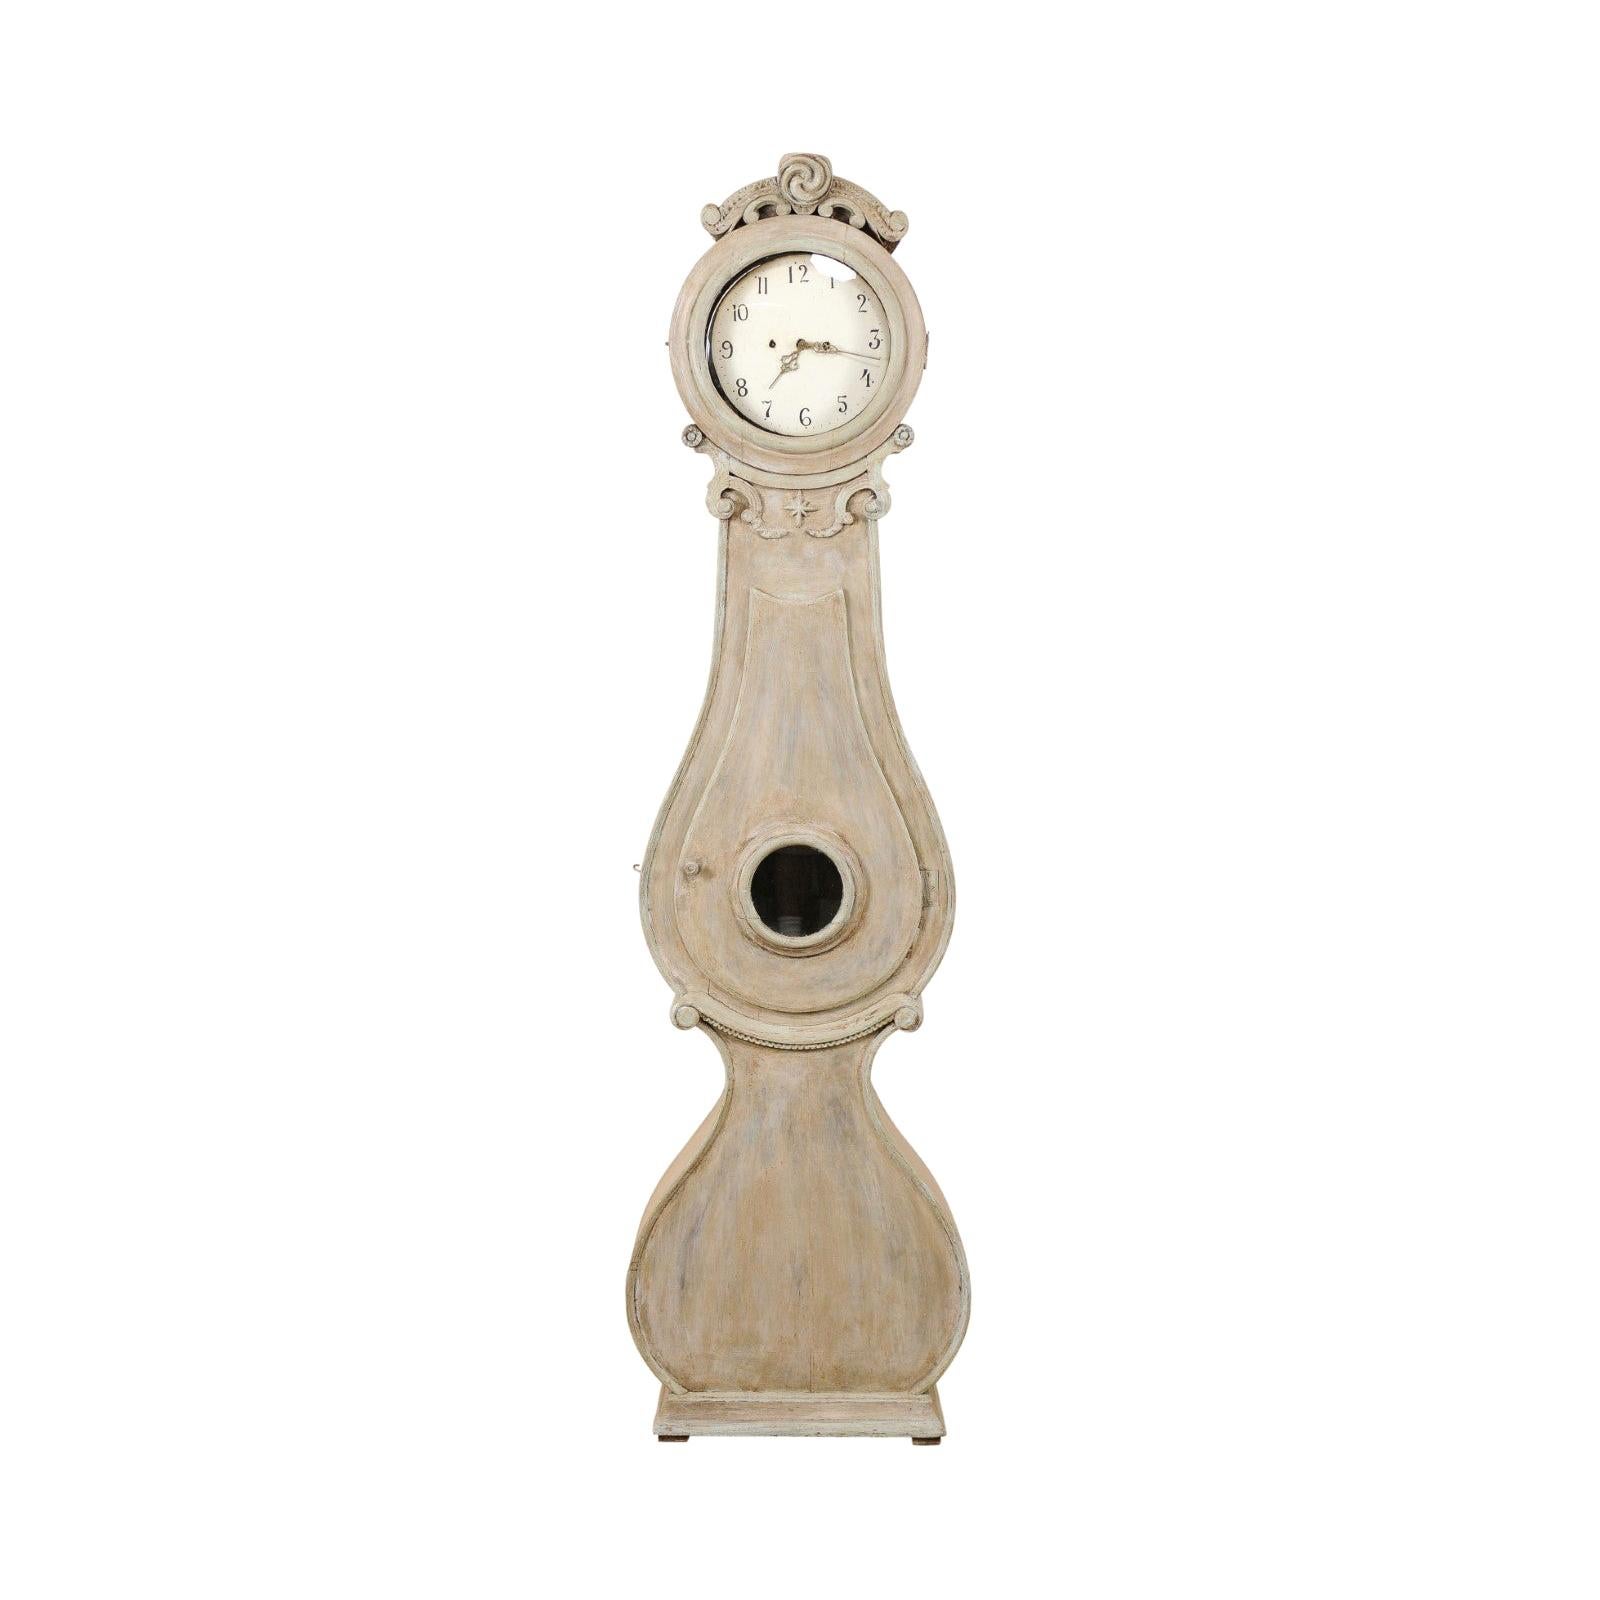 19th Century Swedish Fryksdahl Clock with Ornately Carved Crown and Neck